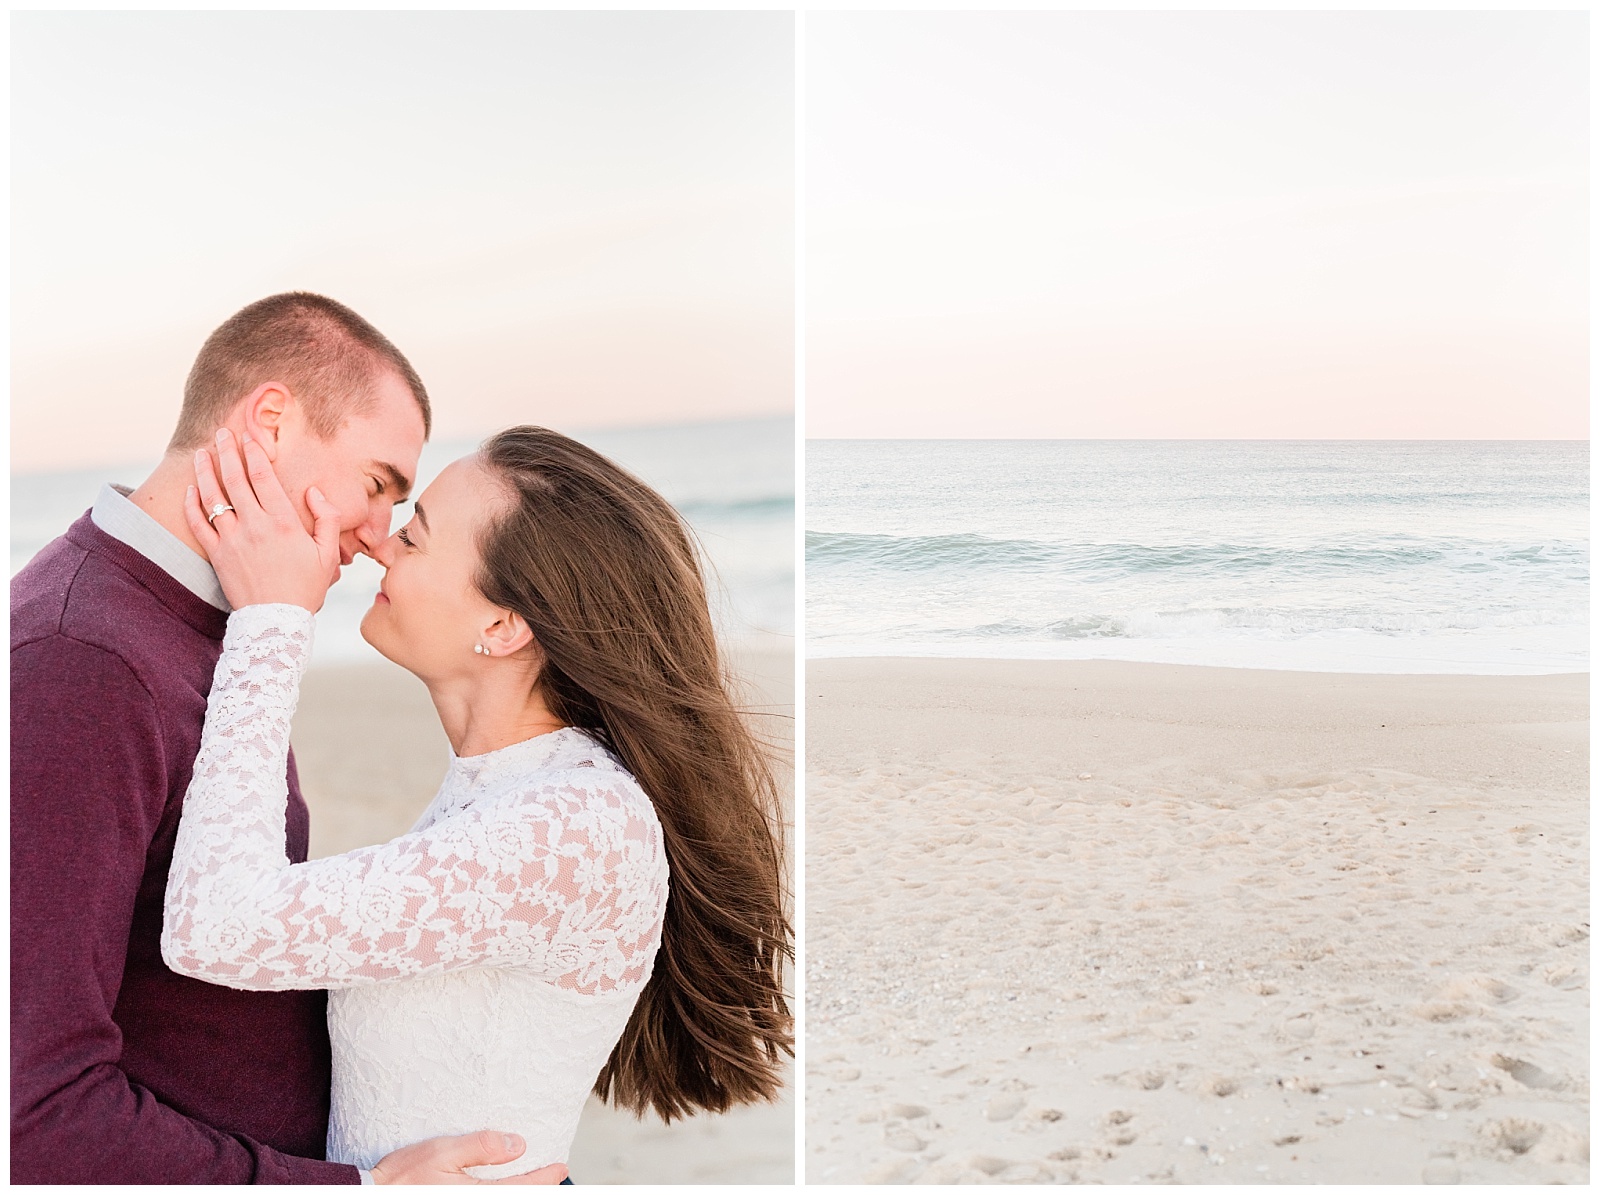 New Jersey, Engagement Session, Wedding Photographer, Beach, Sunset, Shore, Engaged, Ocean